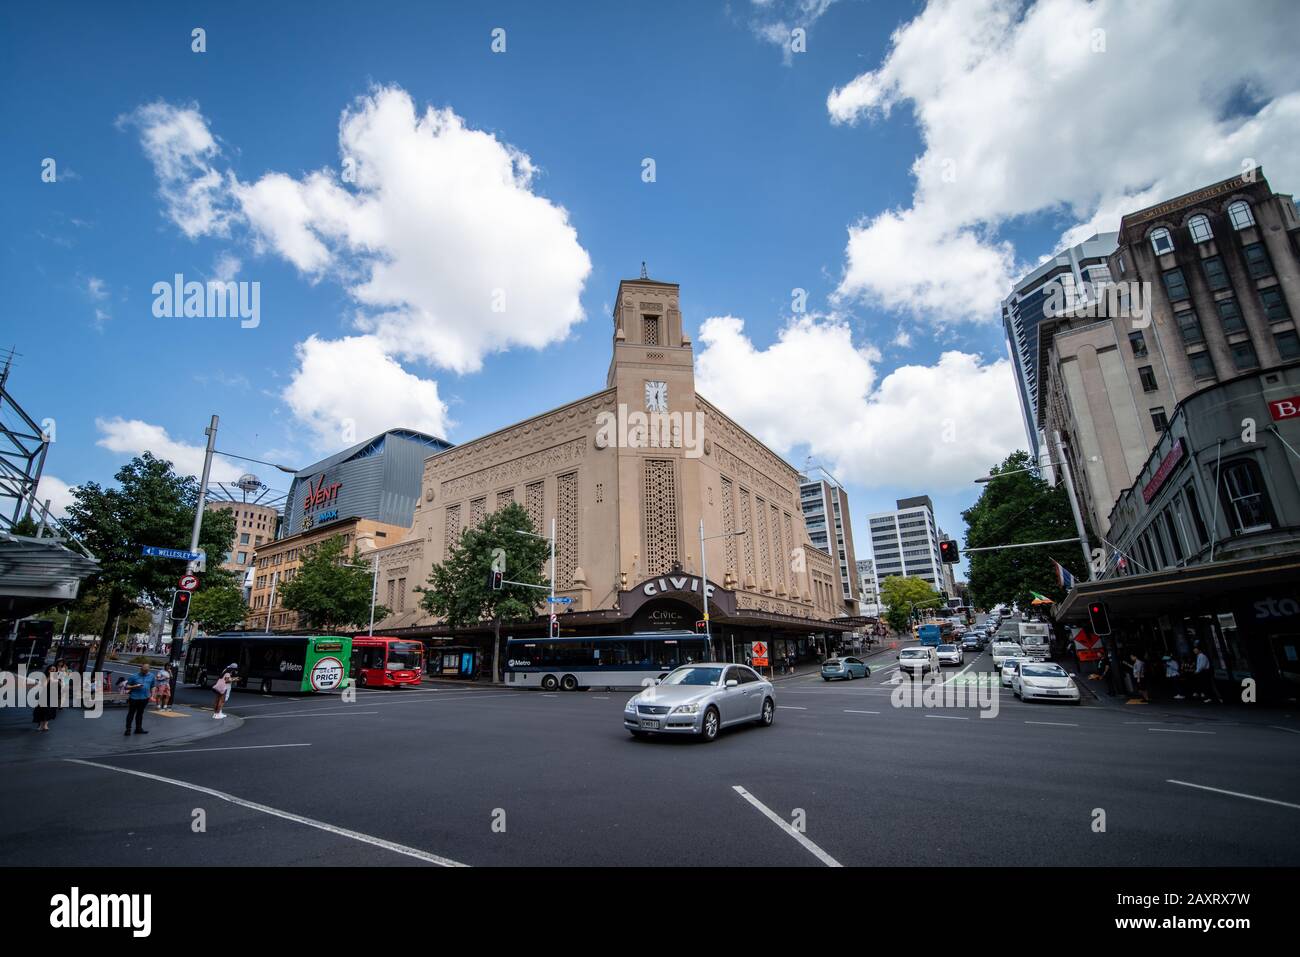 Civic Theatre over the road in Auckland, New Zealand Stock Photo